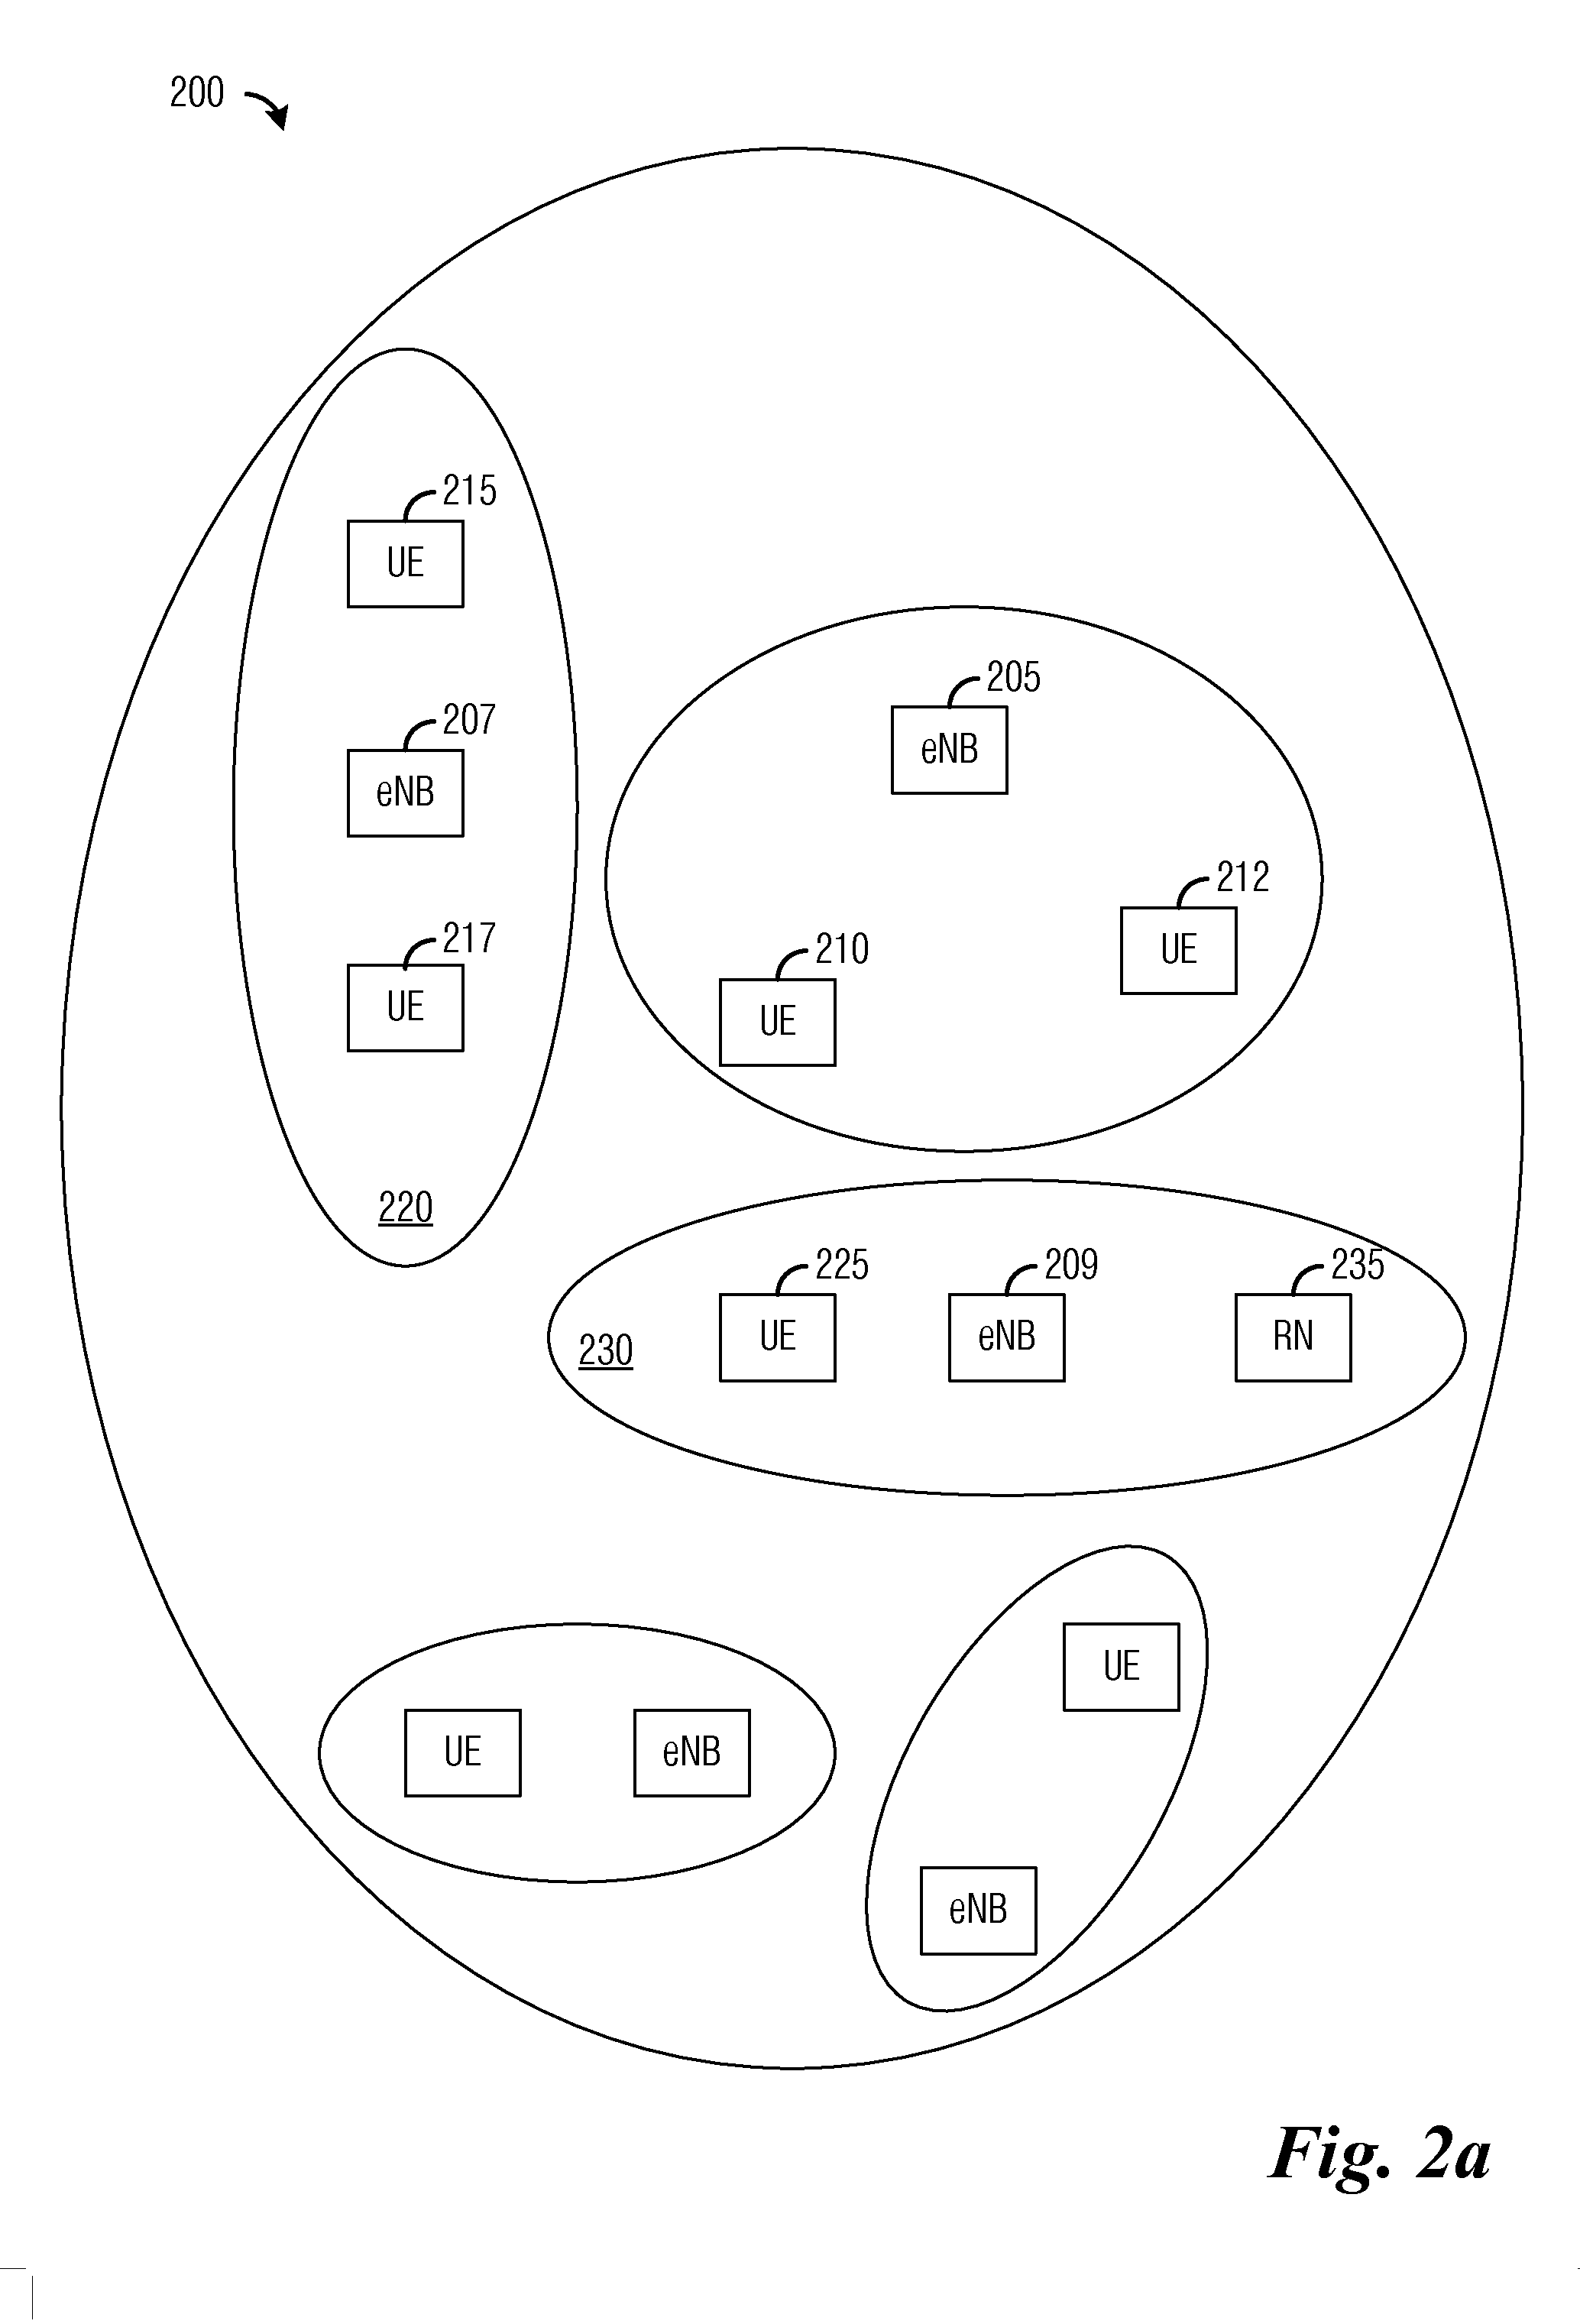 System and Method for Configuring a Communications Network